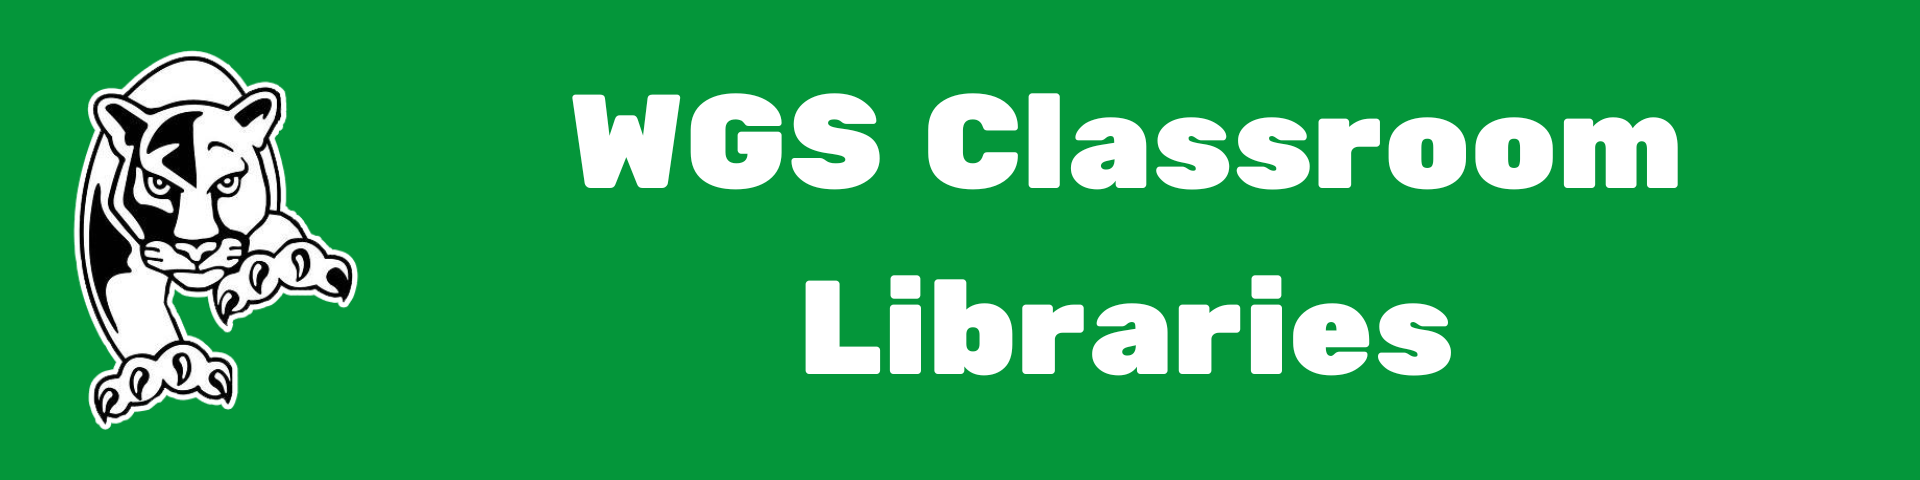 wgs-classroom-libraries